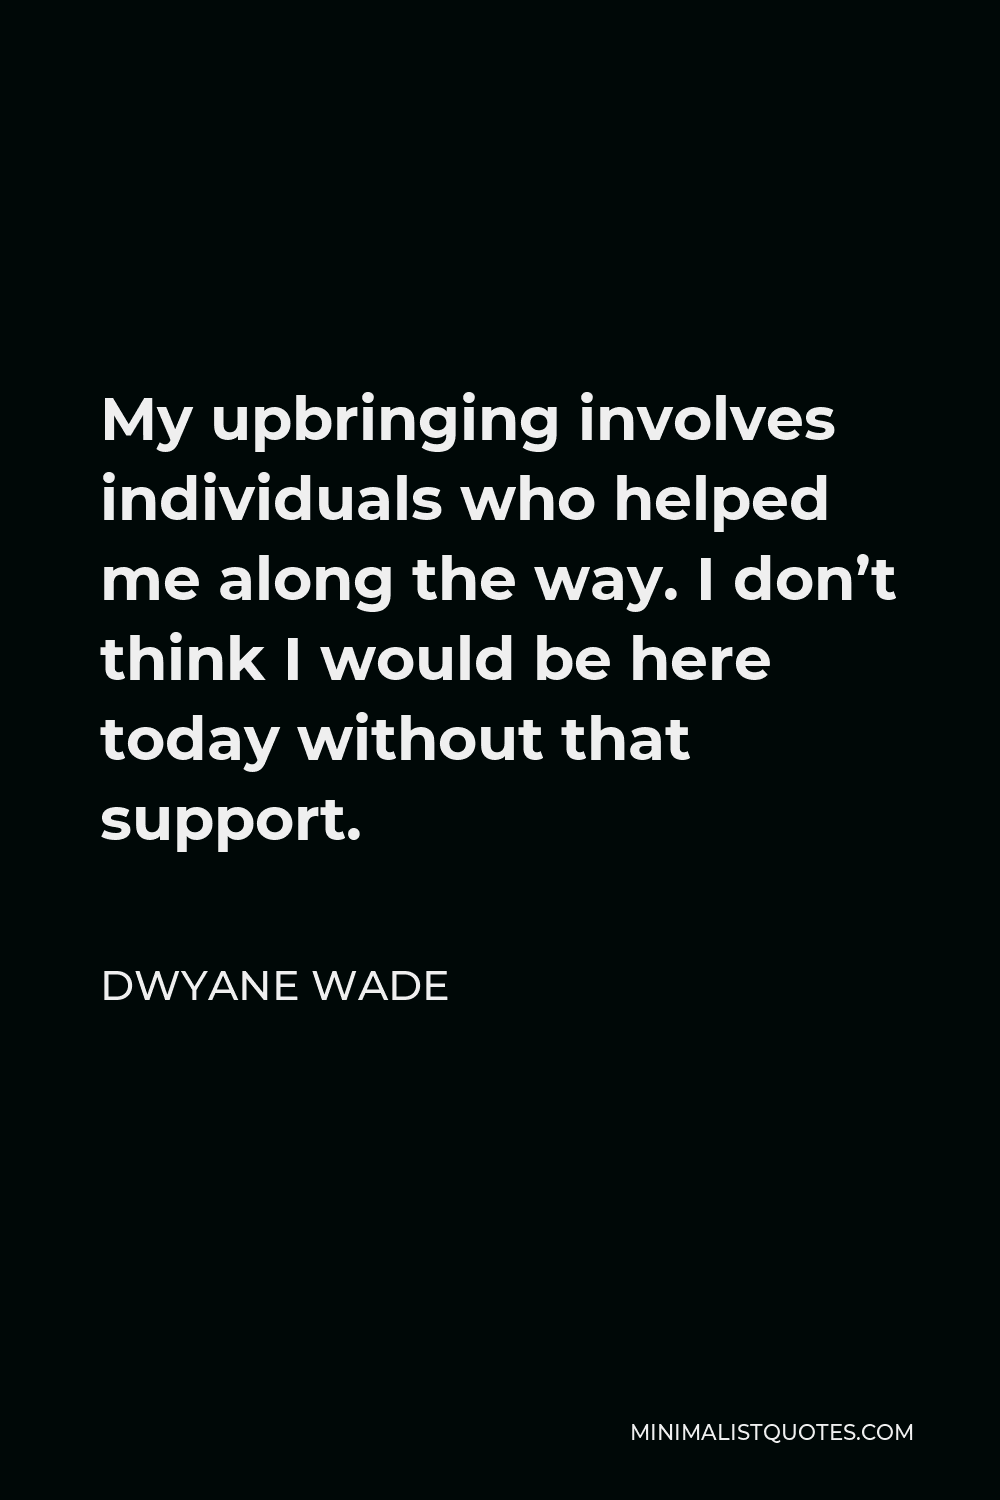 Dwyane Wade Quote - My upbringing involves individuals who helped me along the way. I don’t think I would be here today without that support.